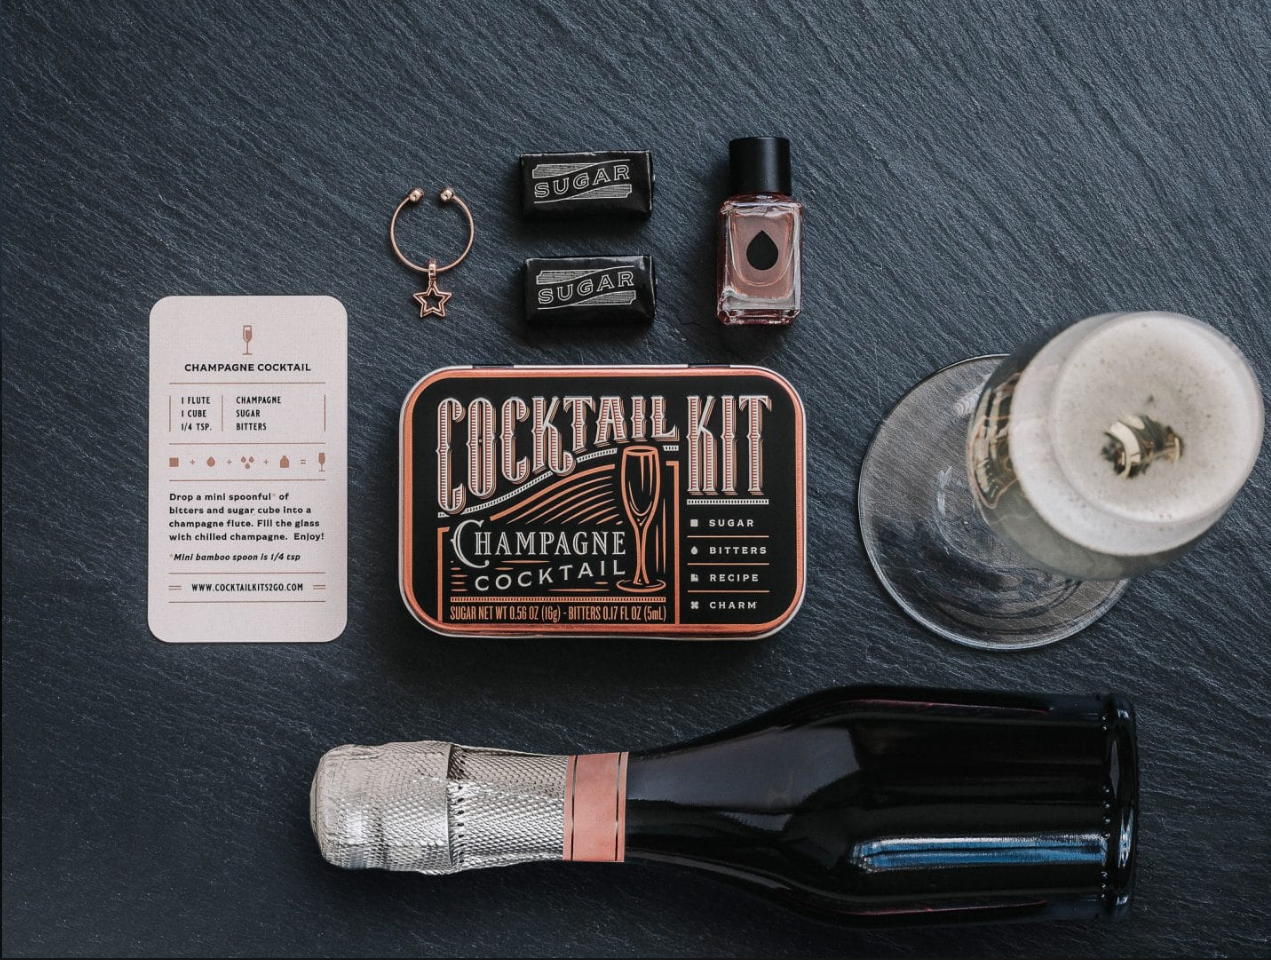 CHAMPAGNE COCKTAIL KIT